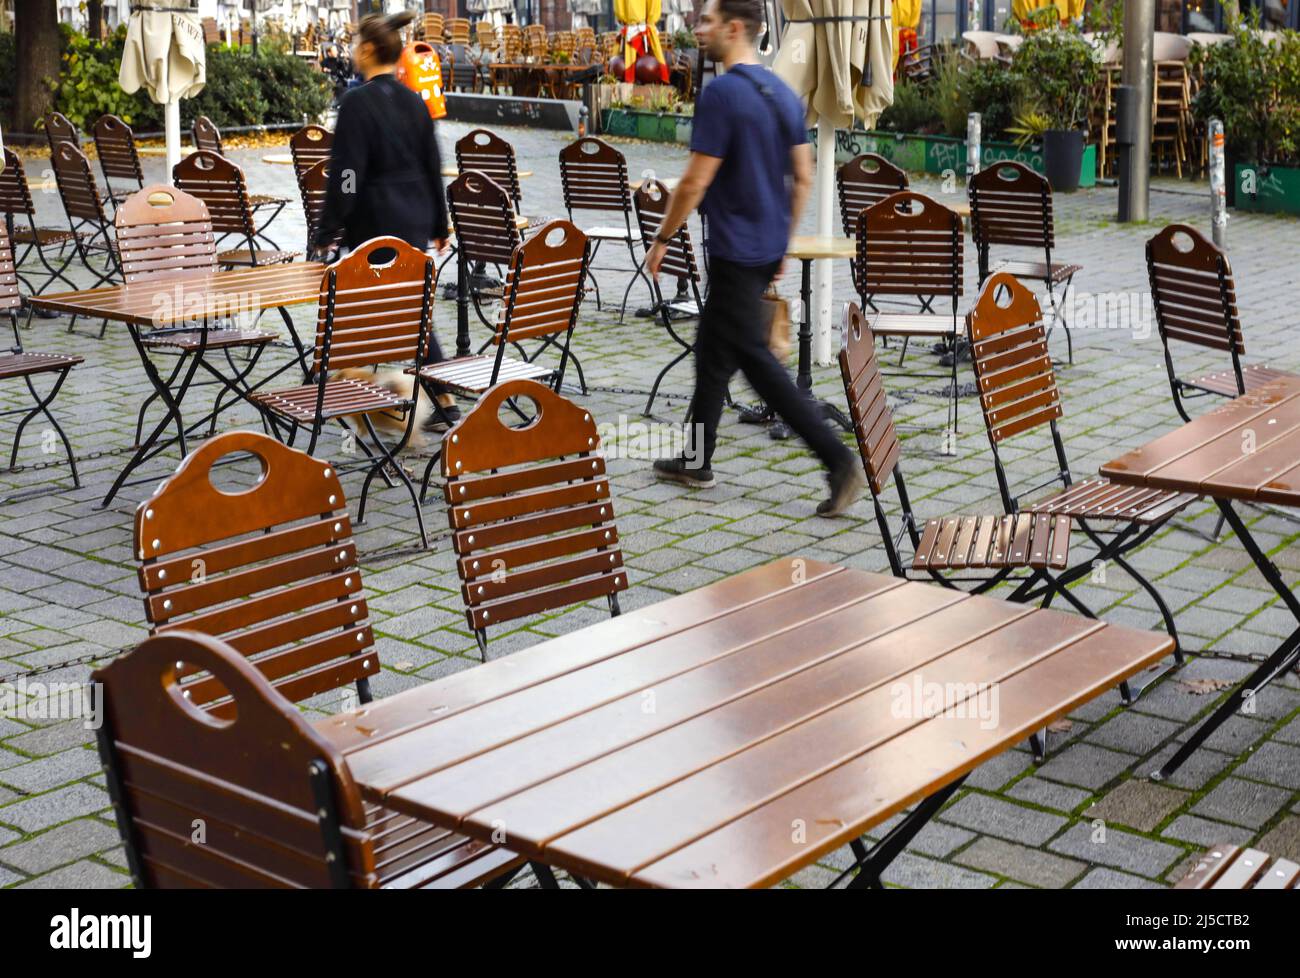 Berlin, DEU, 02.11.2020 - Closed restaurant, chairs and tables chained together. The Corona Partial Lockdown is intended to reduce the number of infections throughout Germany. Restaurants, restaurants, hotels, bars, clubs, discotheques have to close. [automated translation] Stock Photo